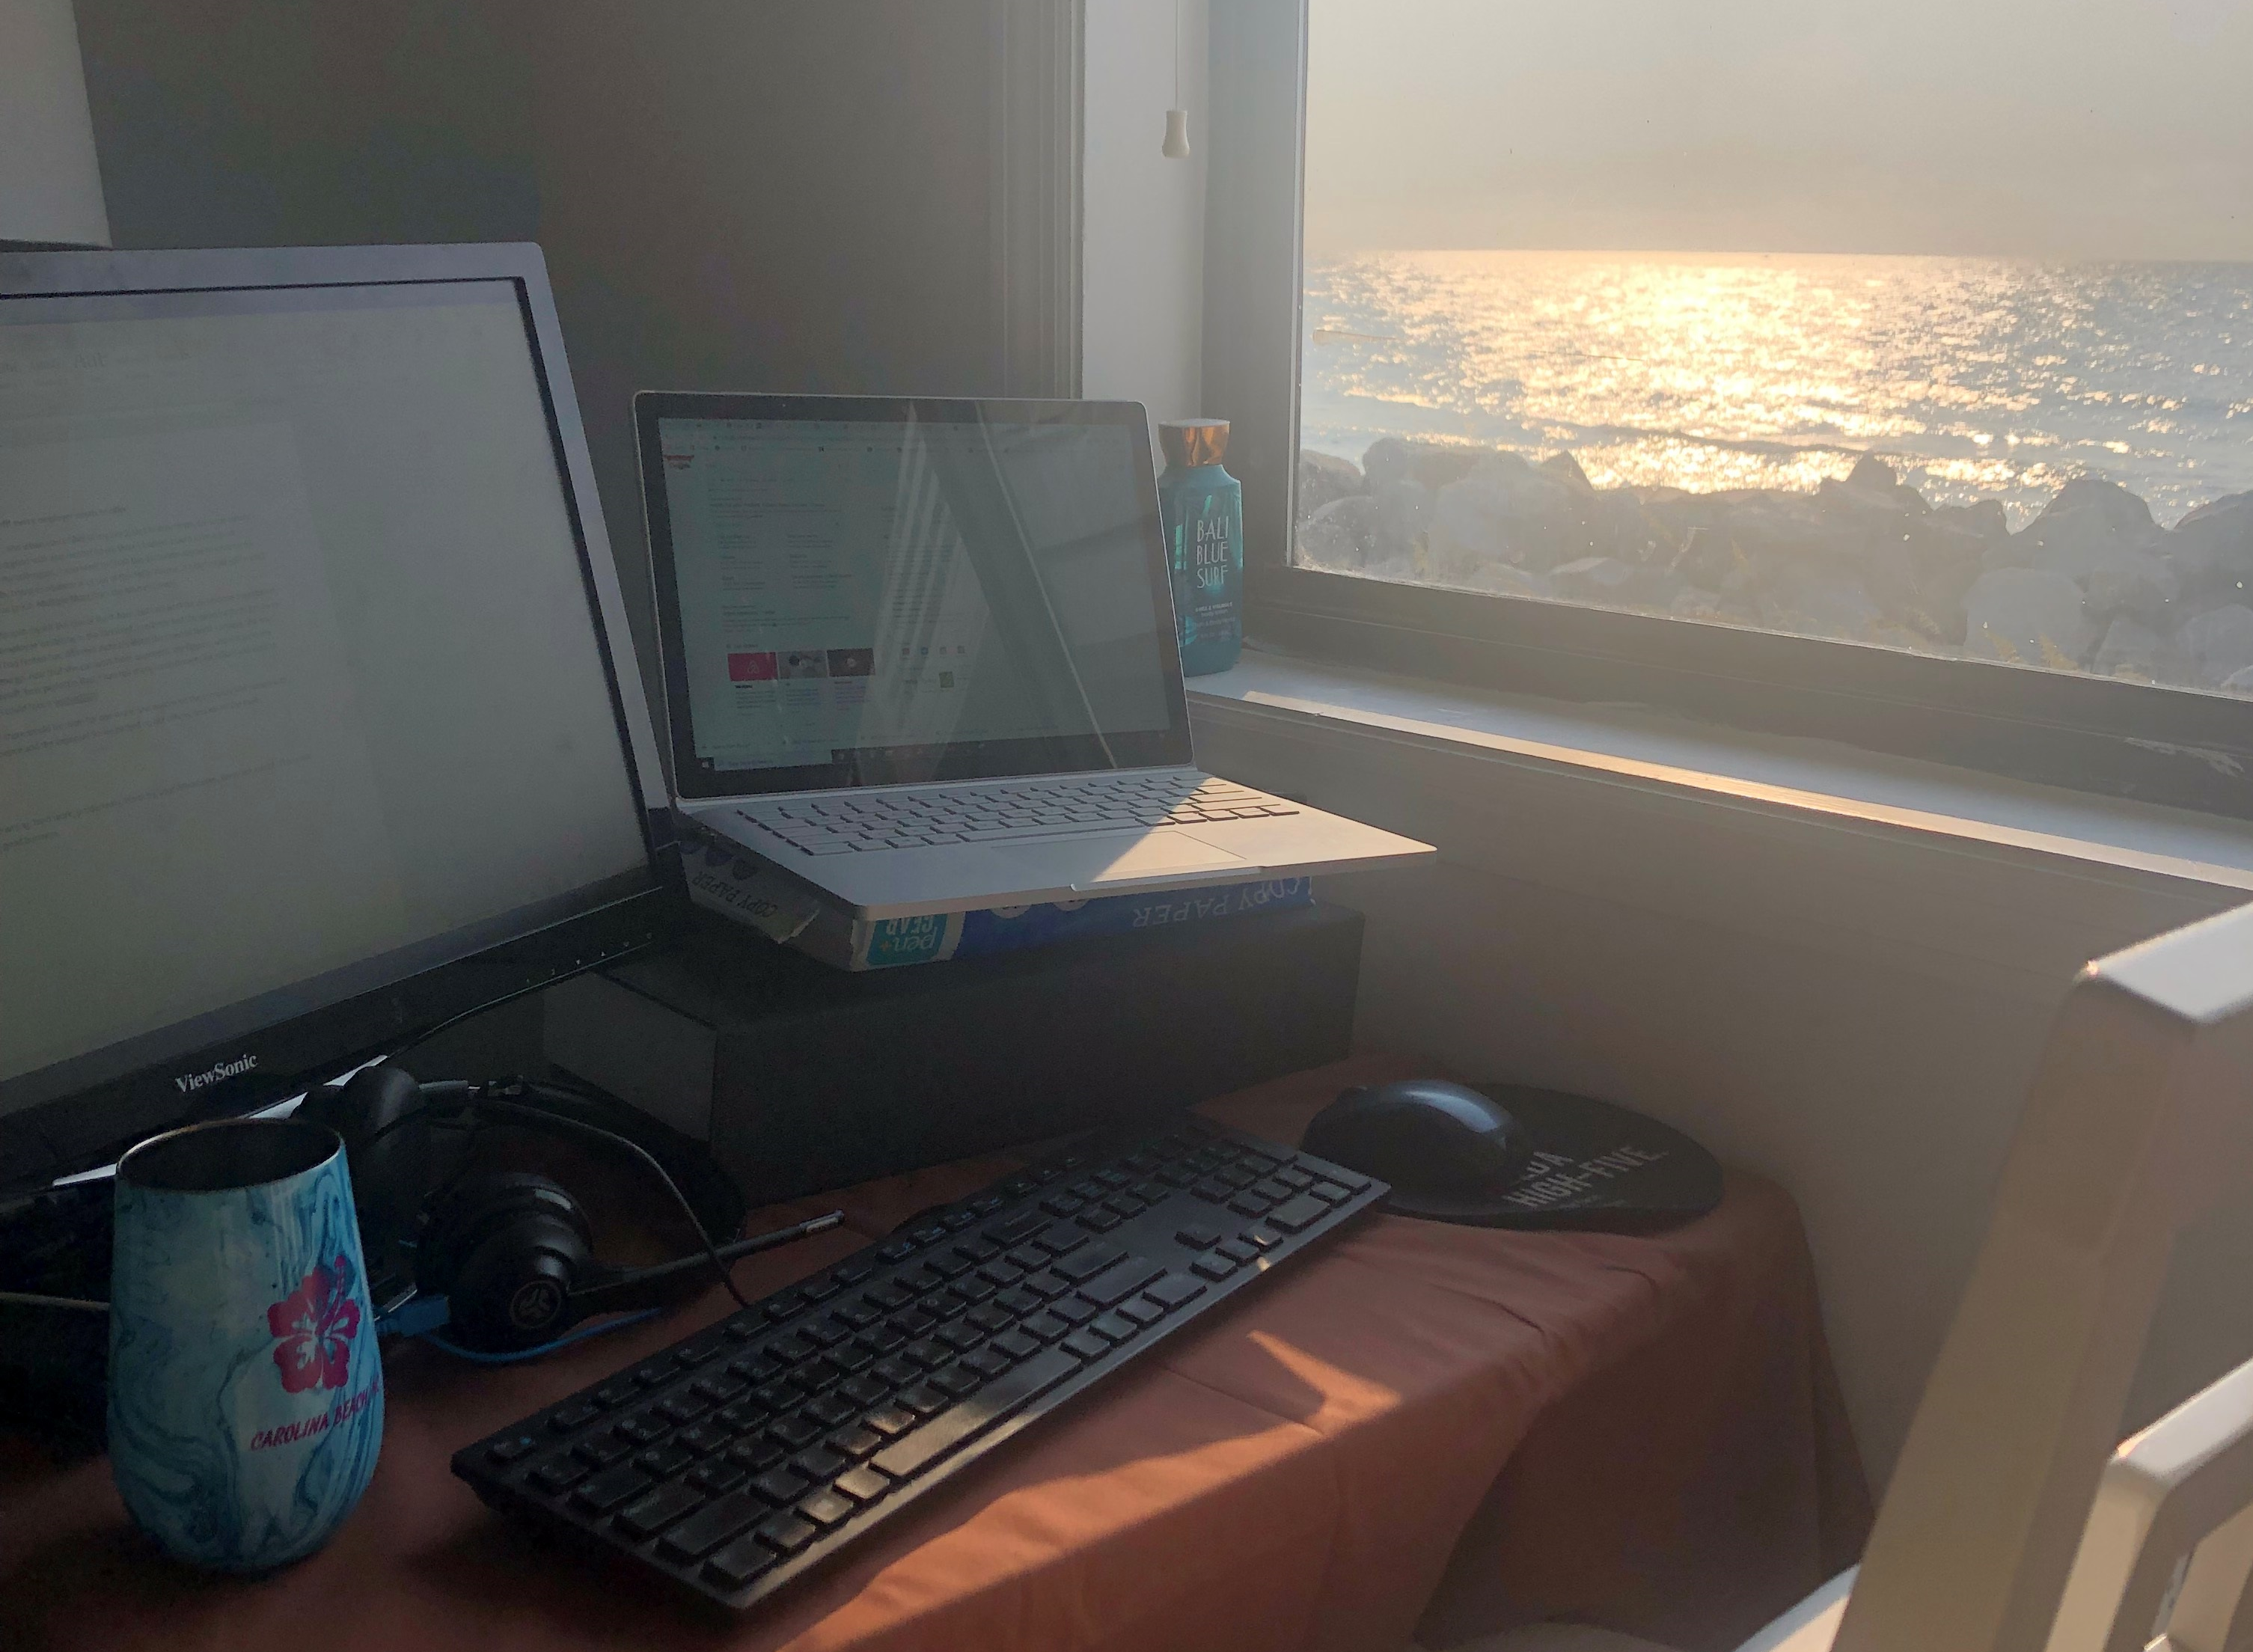 This image shows a computer on a desk with a window that has a view of the ocean.